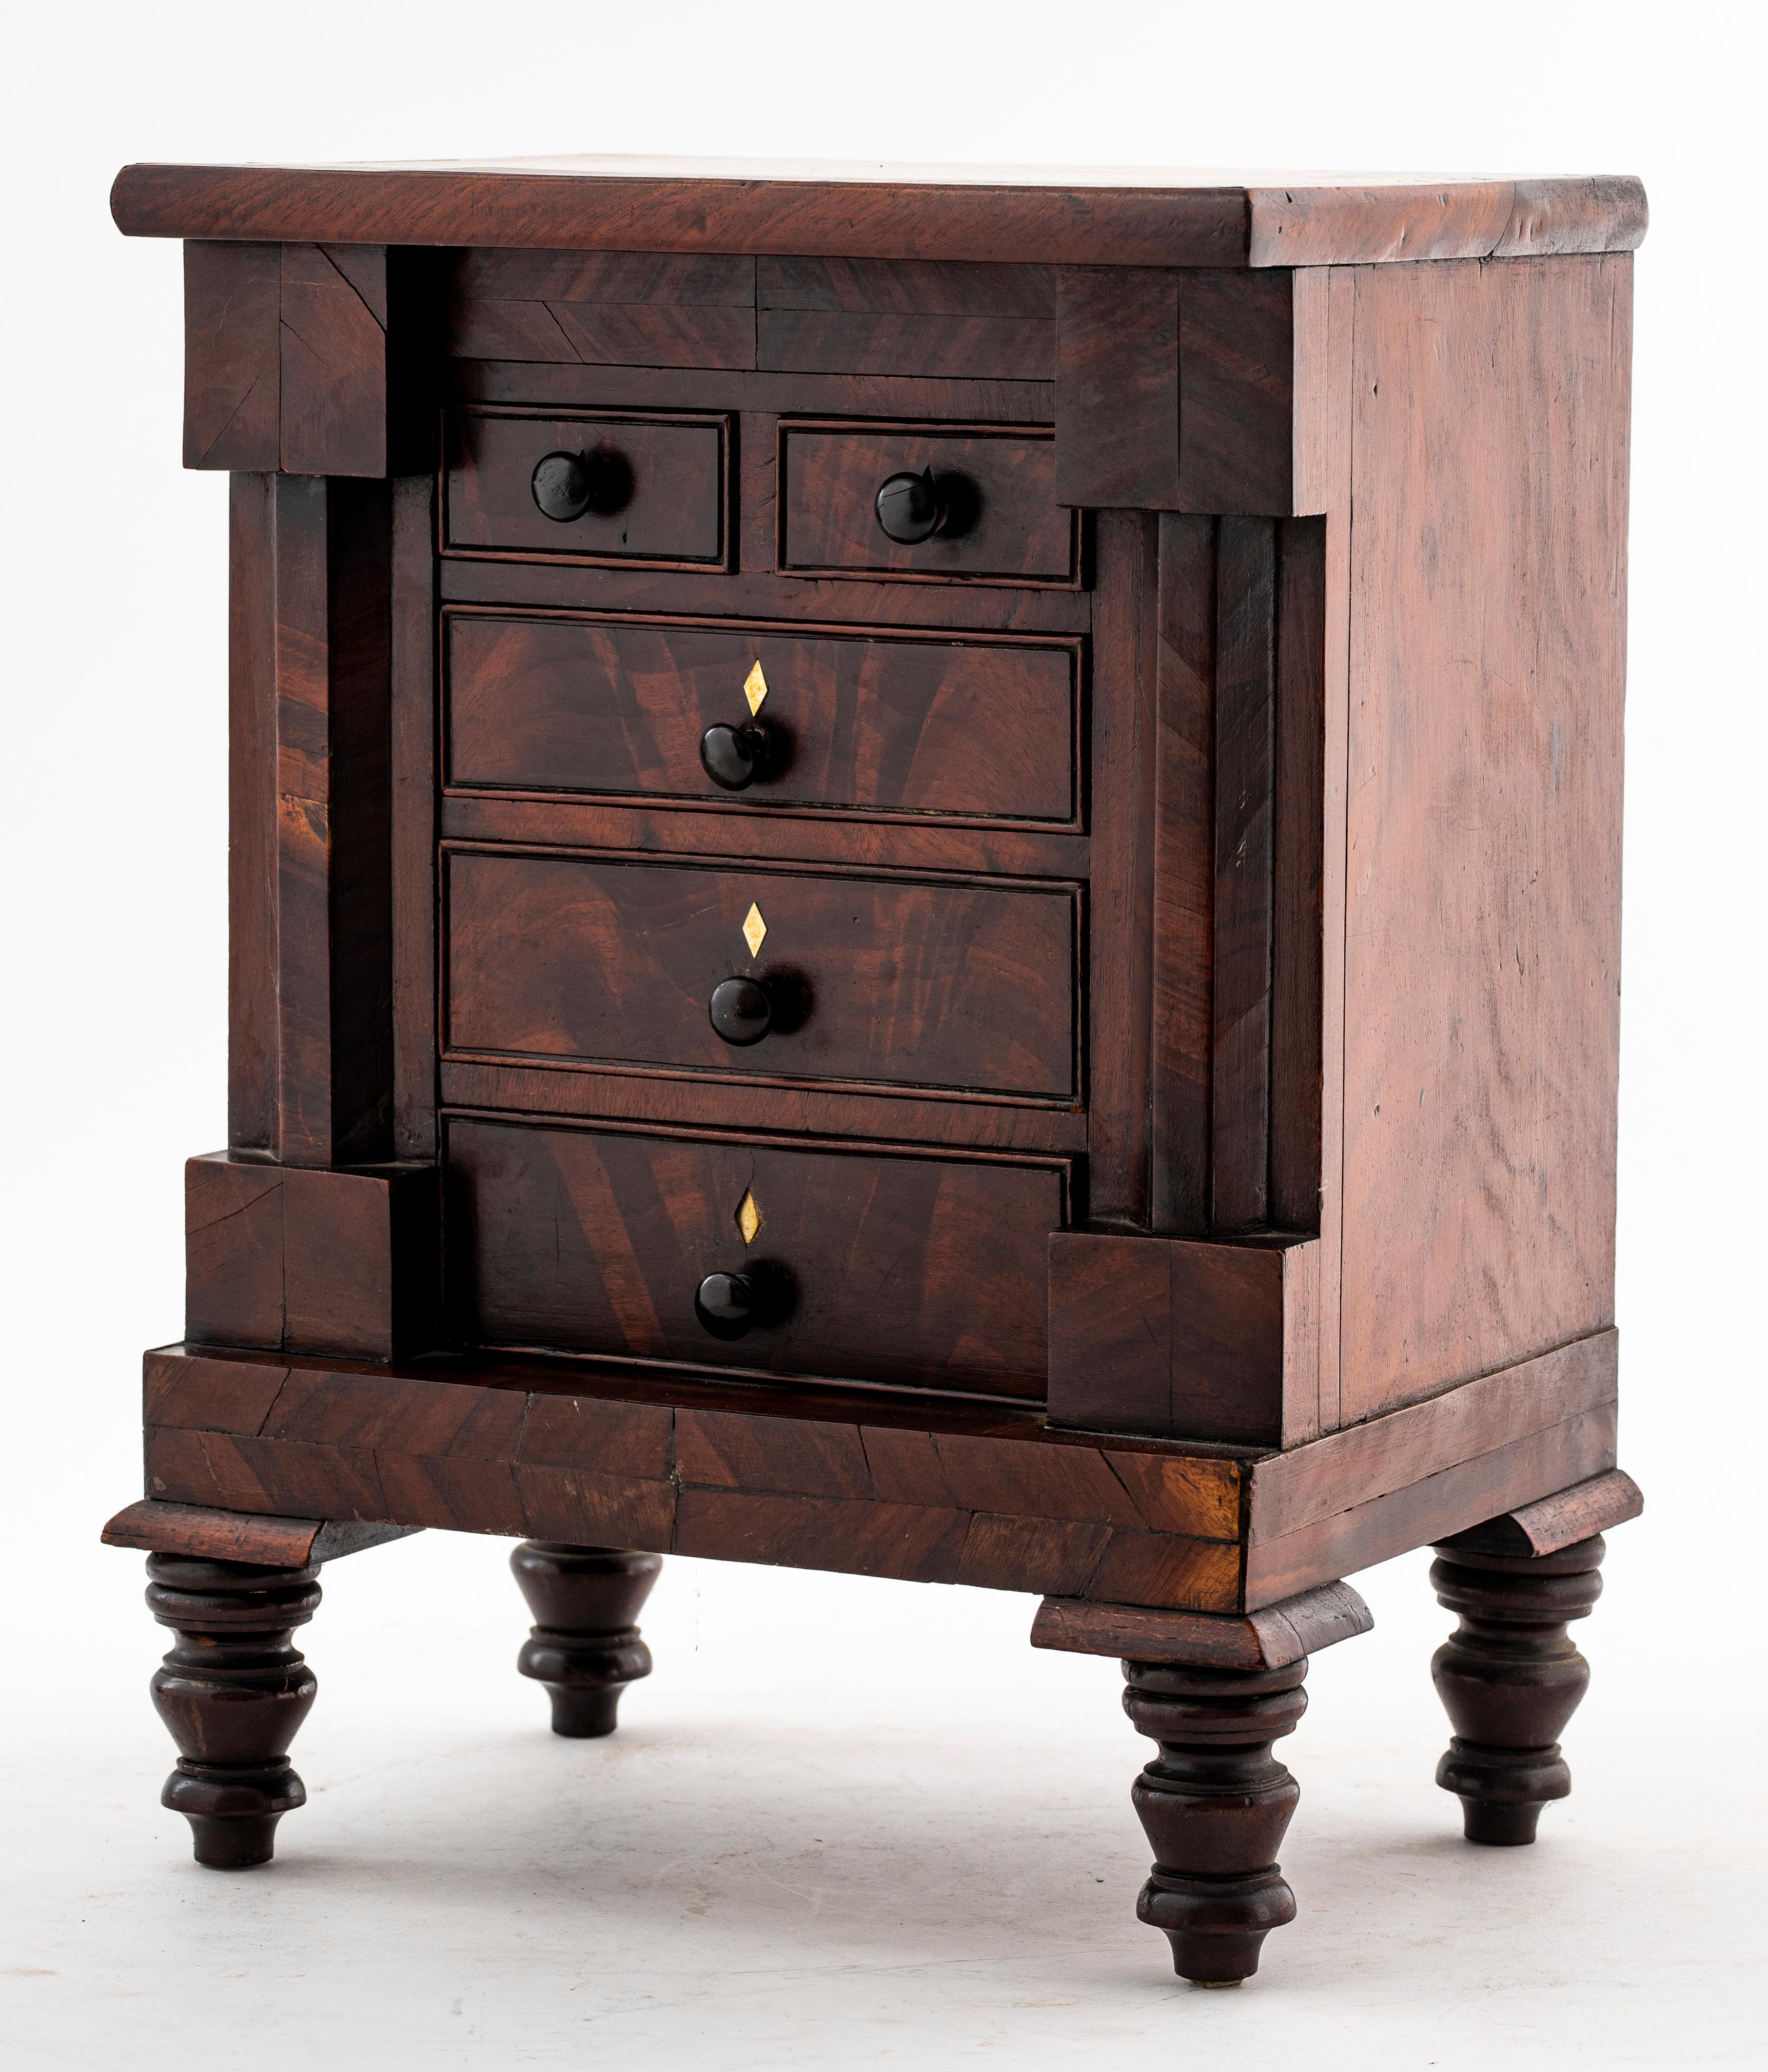 Victorian diminutive chest of drawers or jewelry chest in carved wood with turned legs, two short drawers above three large drawers, unmarked. Measures: 15.5